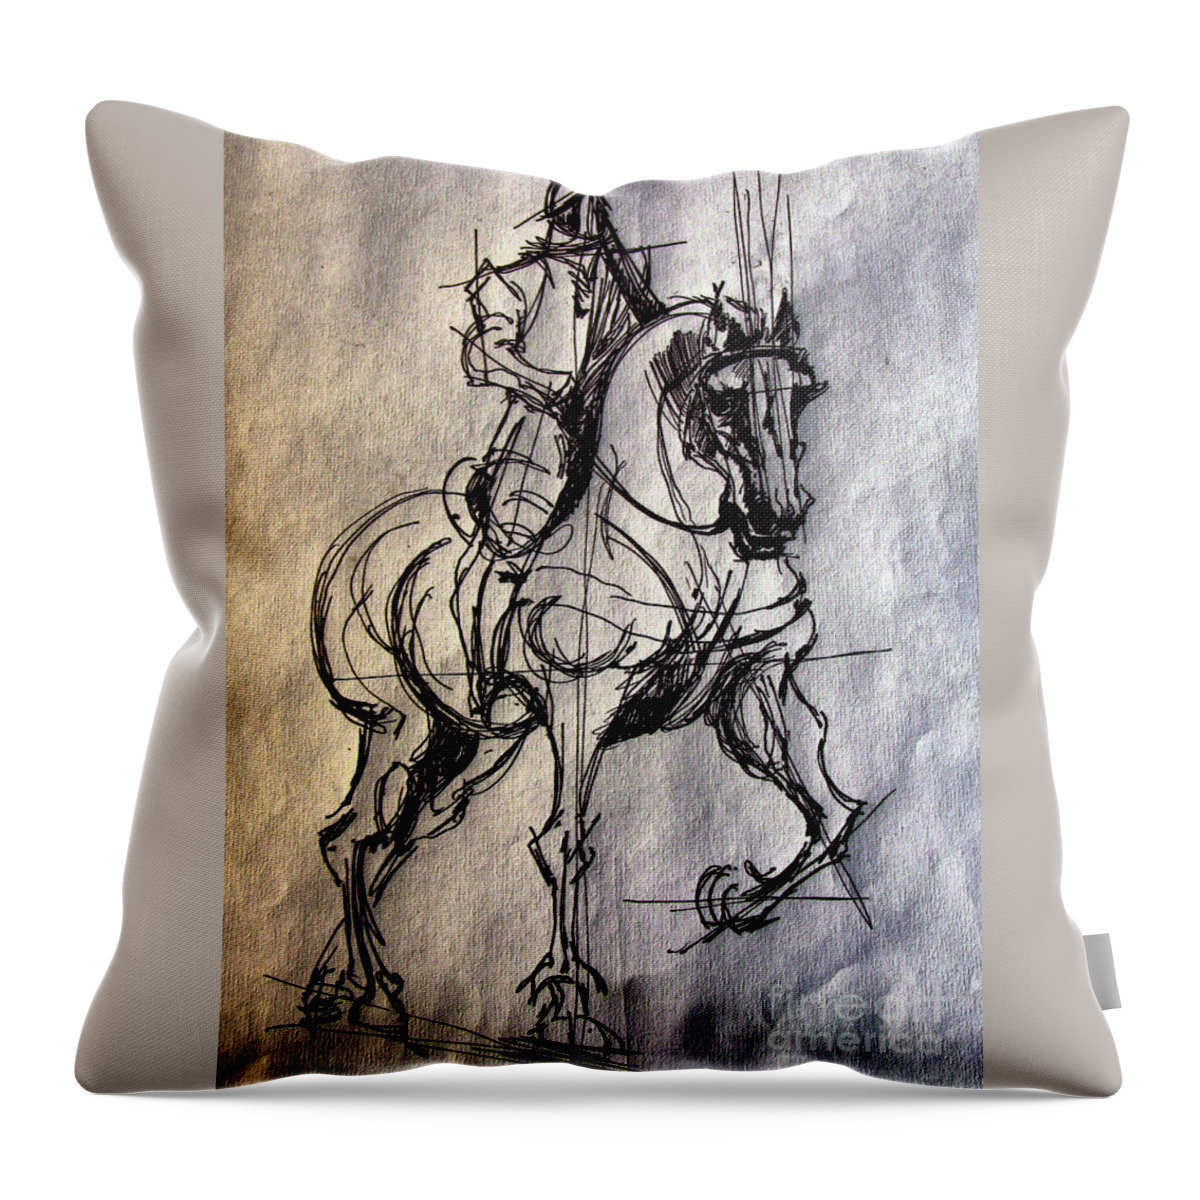 Knight Throw Pillow featuring the drawing Knight by Daliana Pacuraru